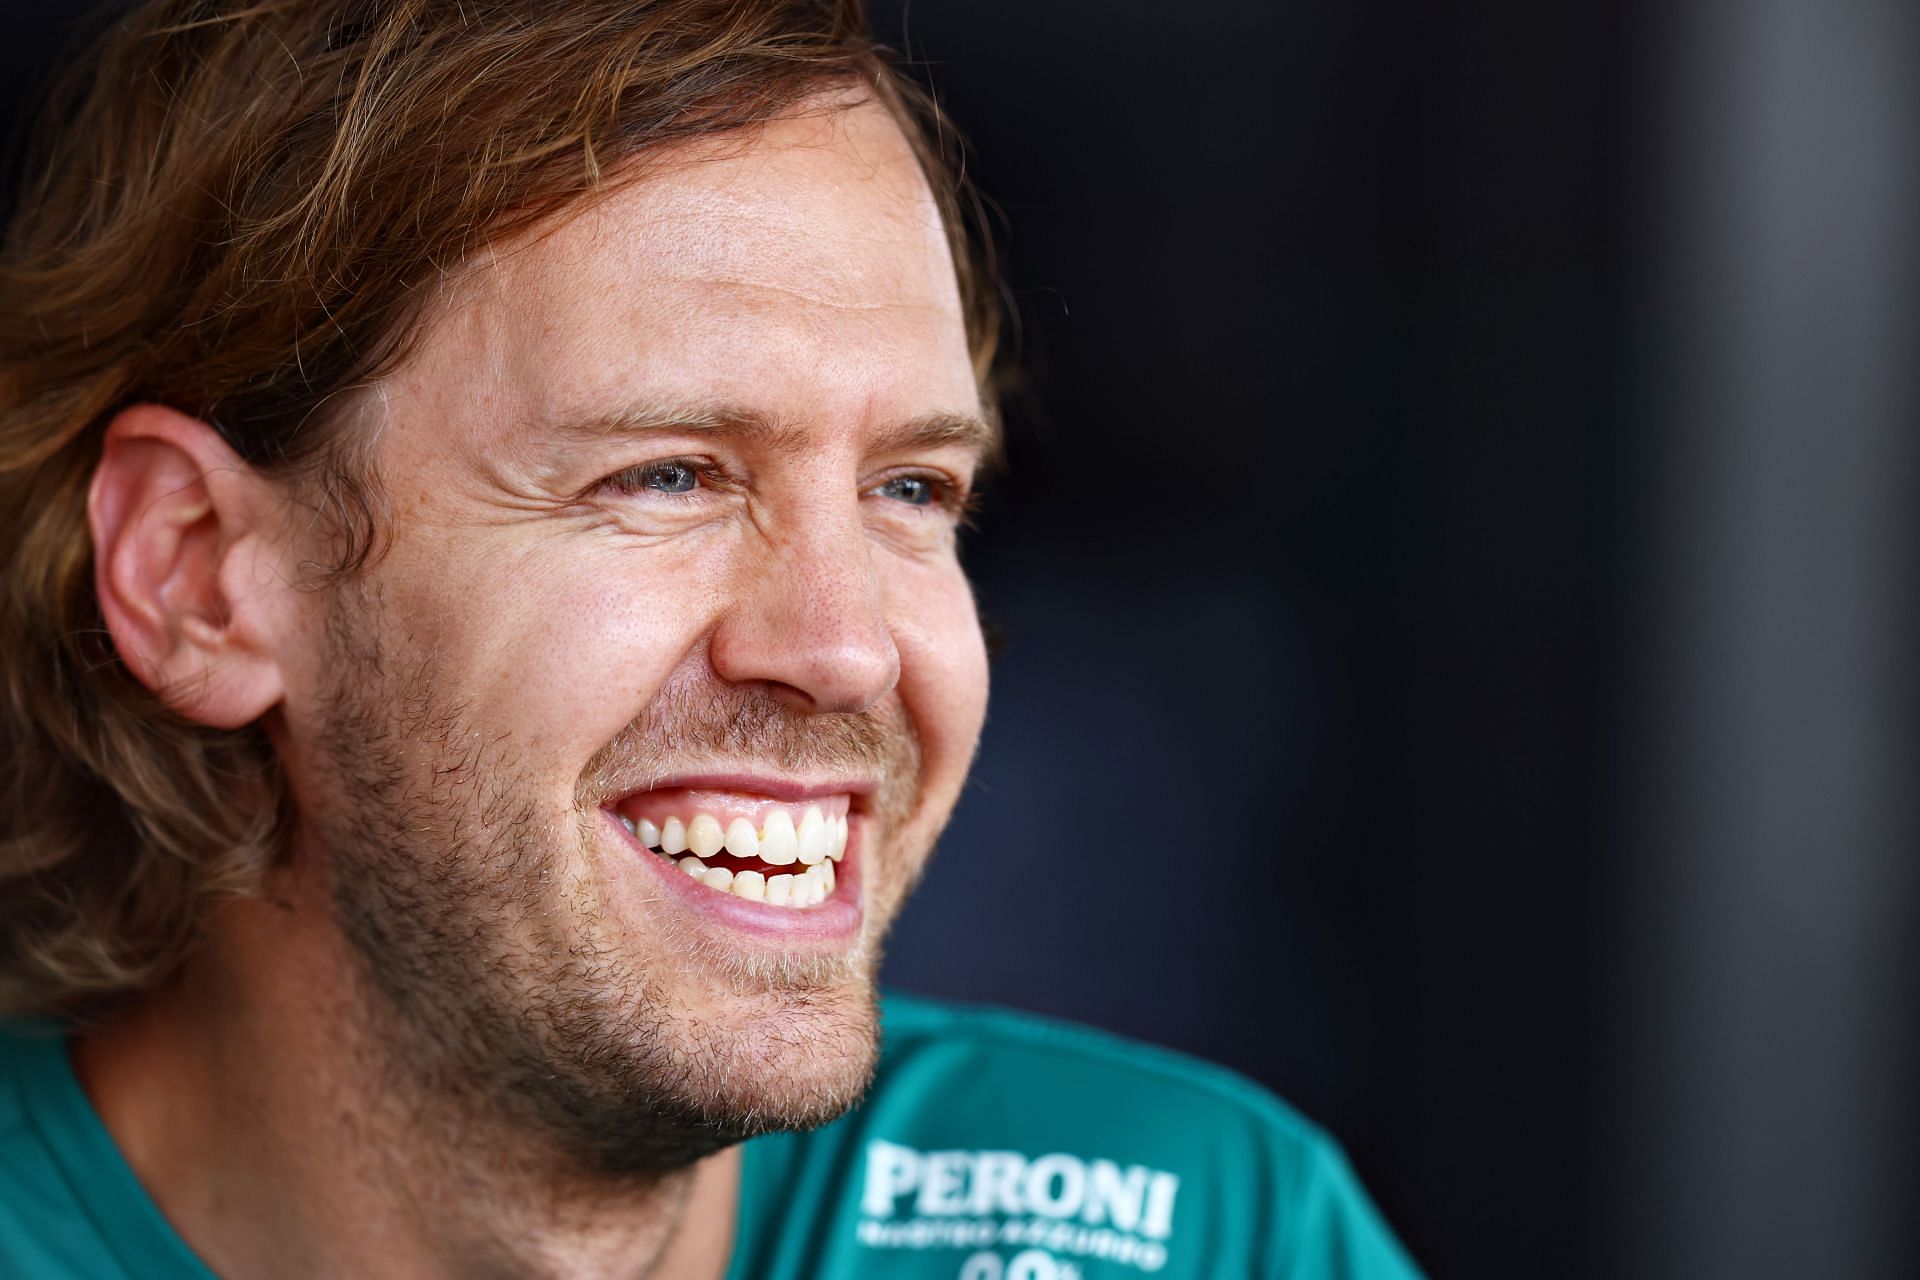 Sebastian Vettel talks to the media in the Paddock during previews ahead of the F1 Grand Prix of Hungary at Hungaroring on July 28, 2022, in Budapest, Hungary (Photo by Francois Nel/Getty Images)